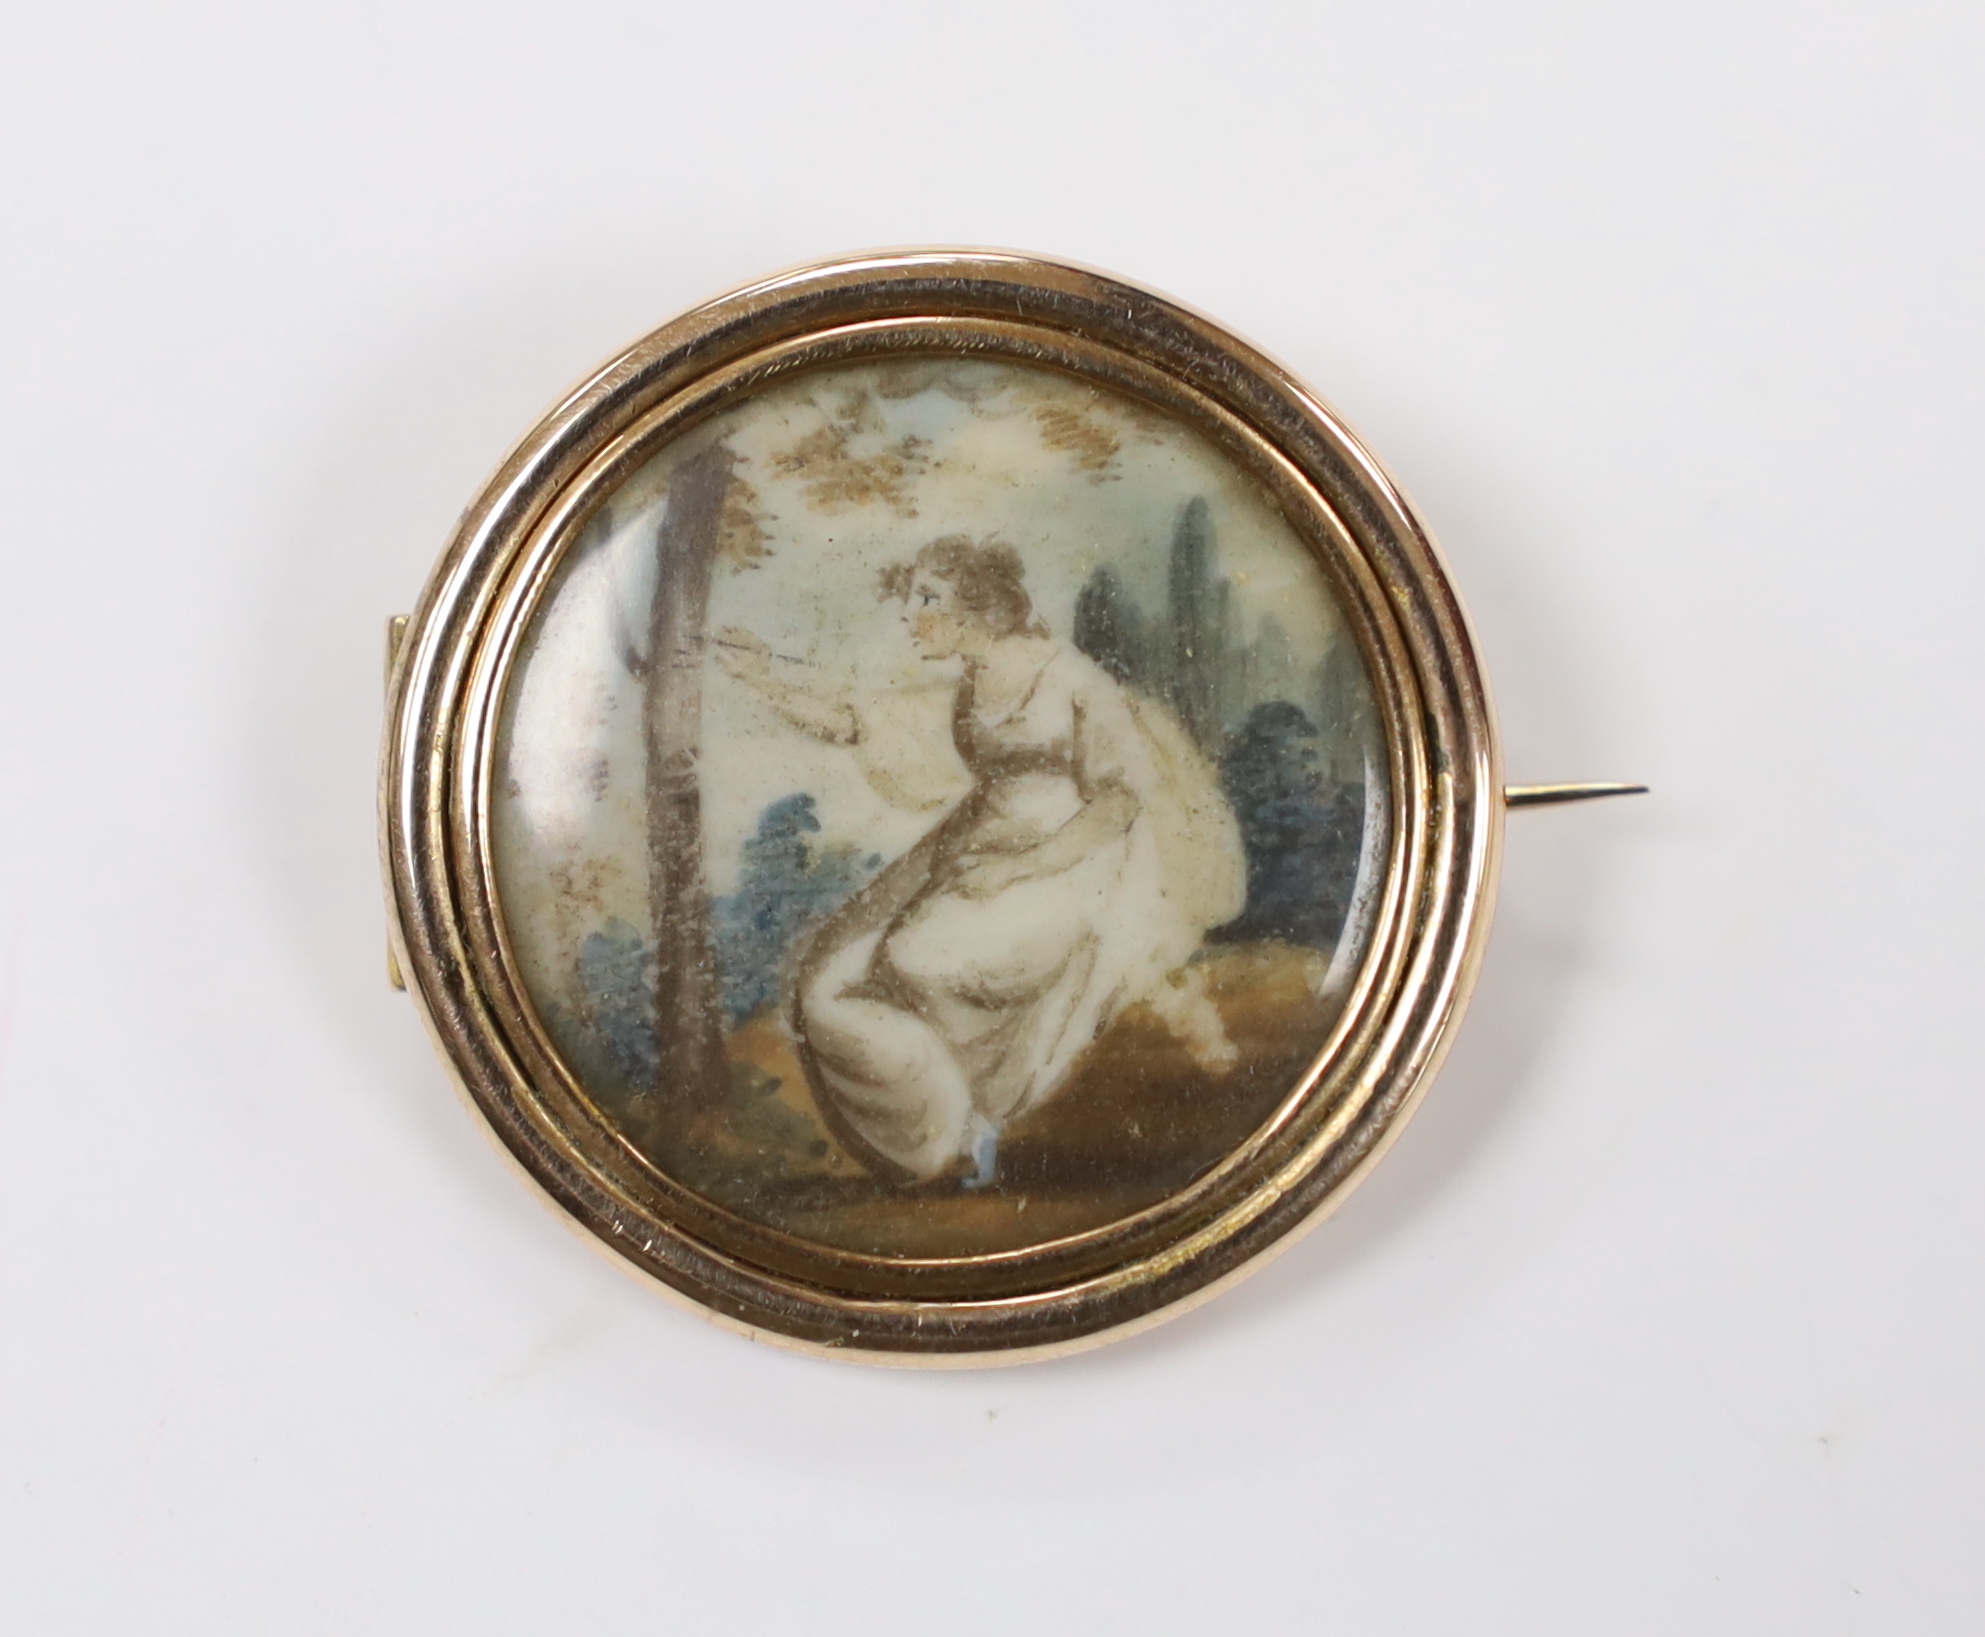 A 19th century yellow metal mounted circular brooch, with glazed back and inset miniature watercolour on ivory, depicting a lady in woodland scene, 31mm. CITES Submission reference, E5G6FZPZ